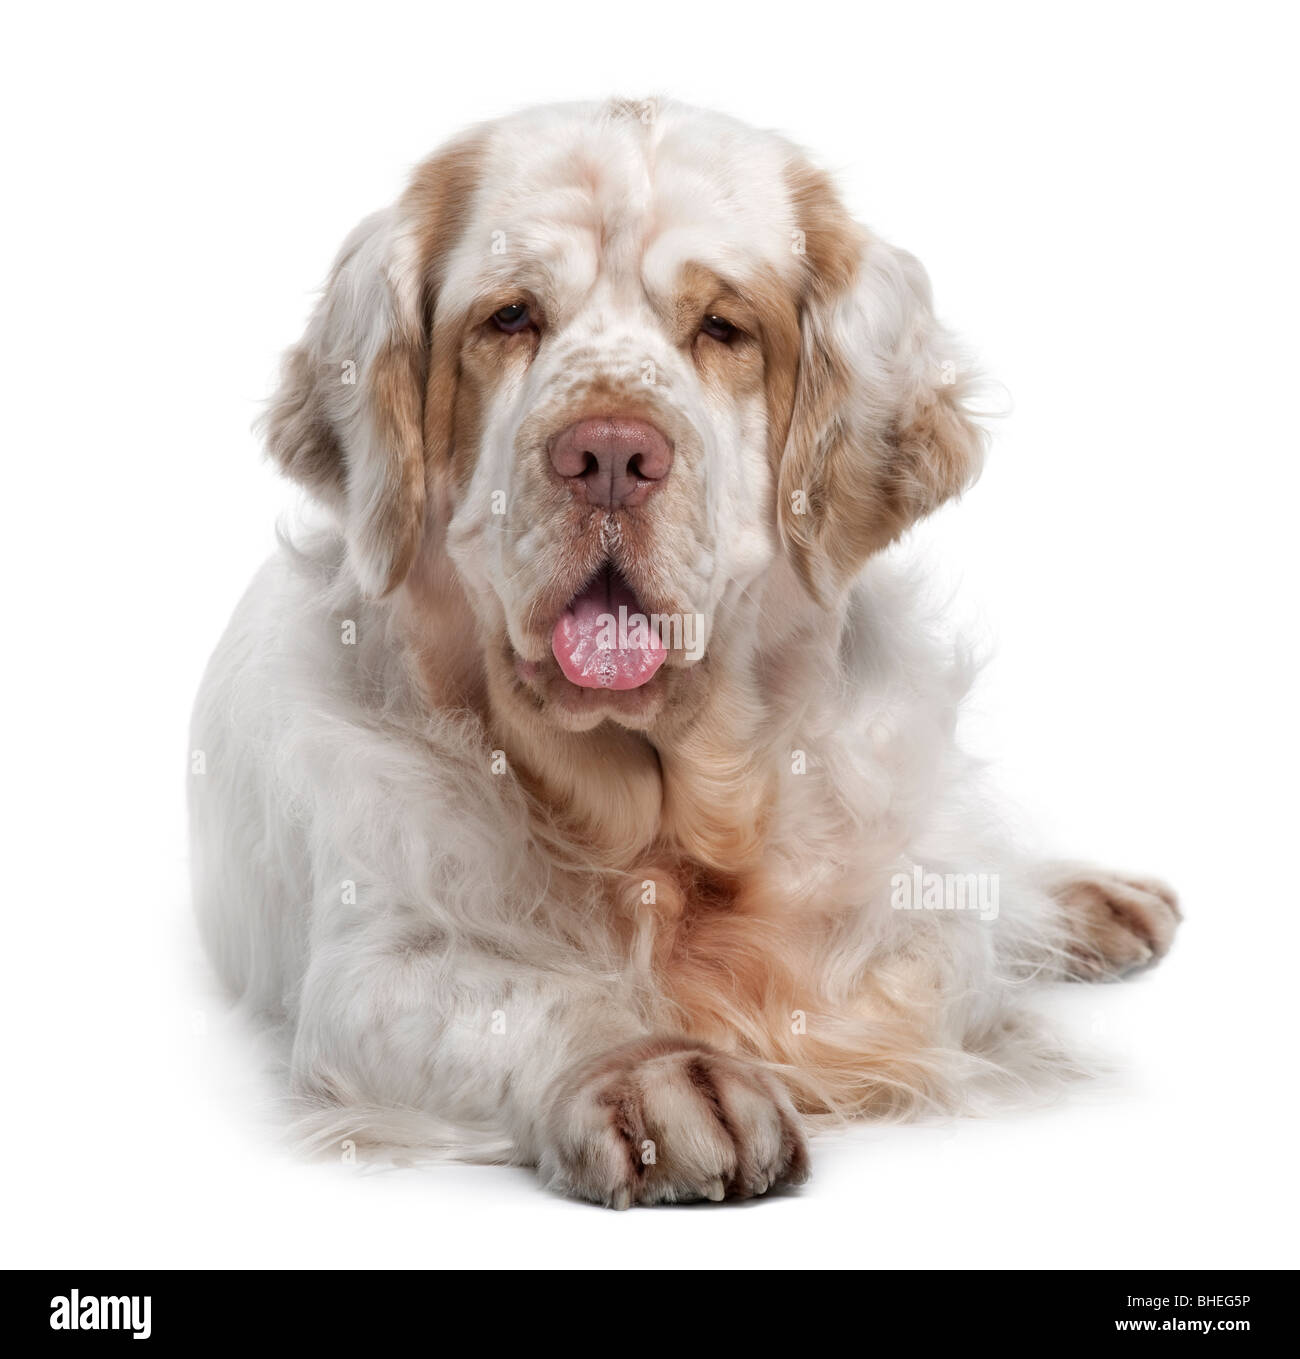 Clumber Spaniel dog, 5 years old, lying in front of white background Stock Photo